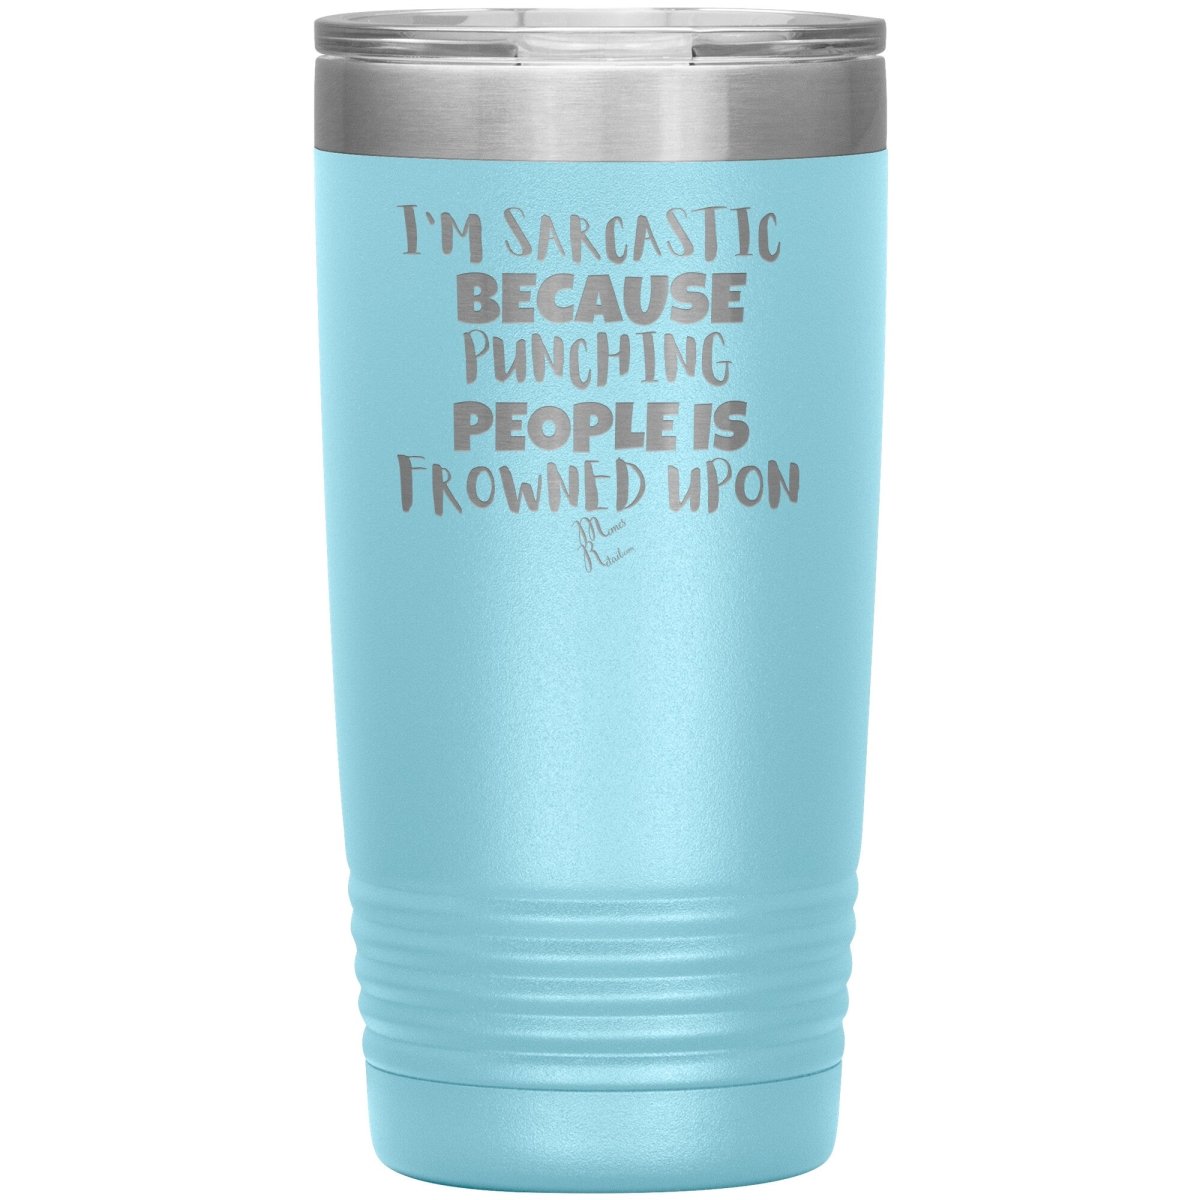 I'm Sarcastic Because Punching People is Frowned Upon Tumblers, 20oz Insulated Tumbler / Light Blue - MemesRetail.com